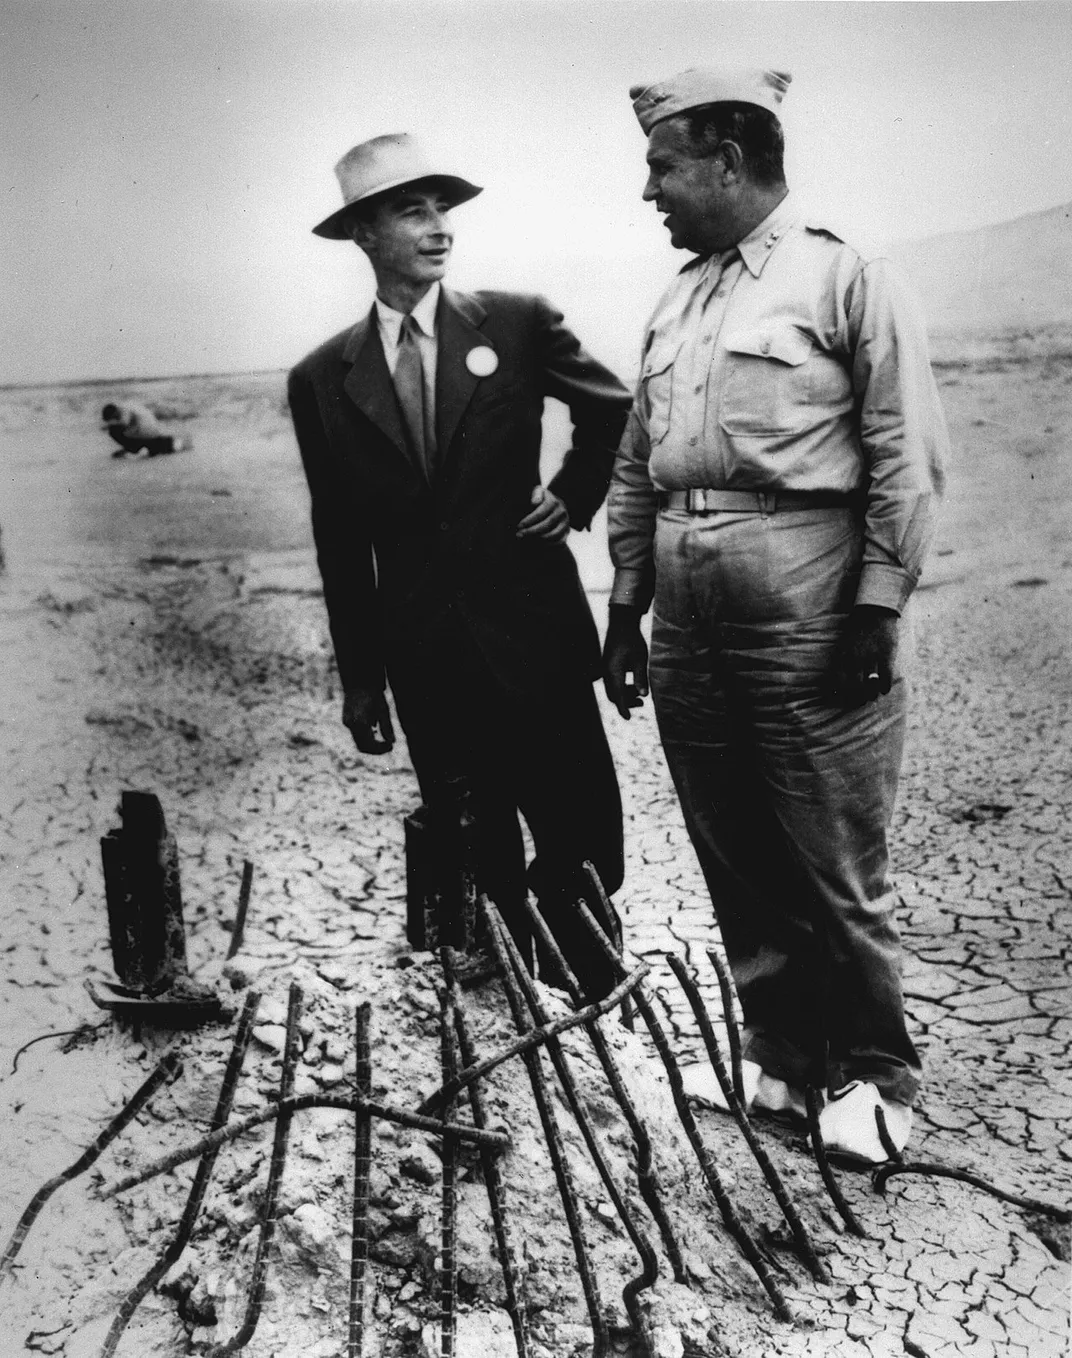 Oppenheimer (left) and General Leslie Groves (right) at ground zero of the nuclear bomb test site